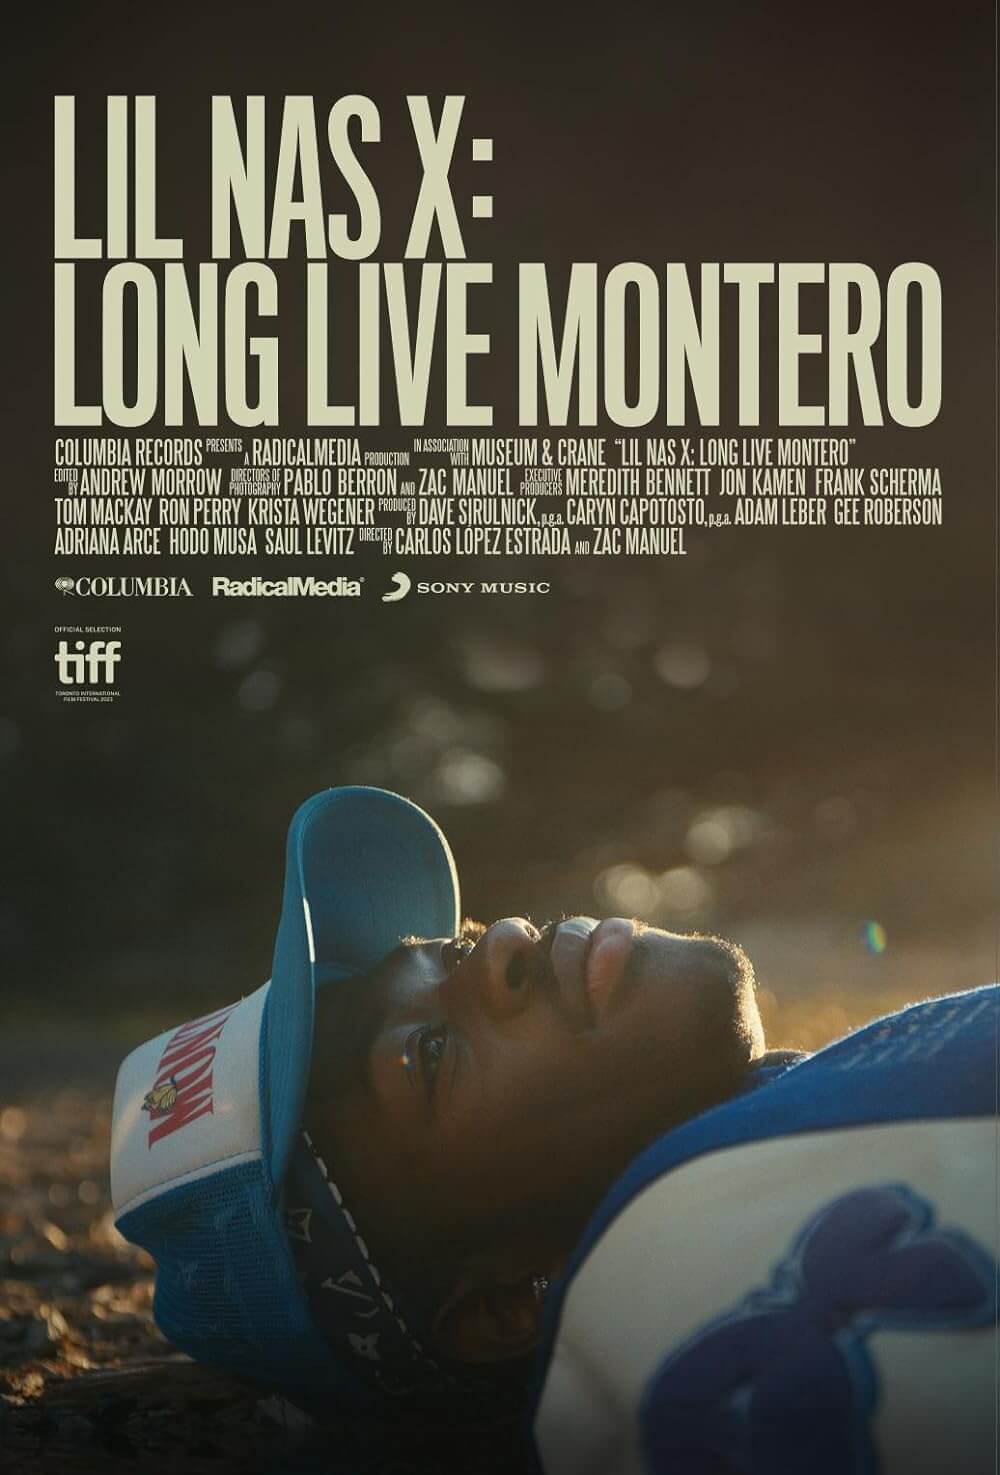 Read more about the article 48th San Francisco International LGBTQ+ Film Festival (Frameline48) runs June 19 through 29; First-ever Castro free outdoor block party event to open the festival followed by a screening of “Lil Nas X: Long Live Montero” documentary feature